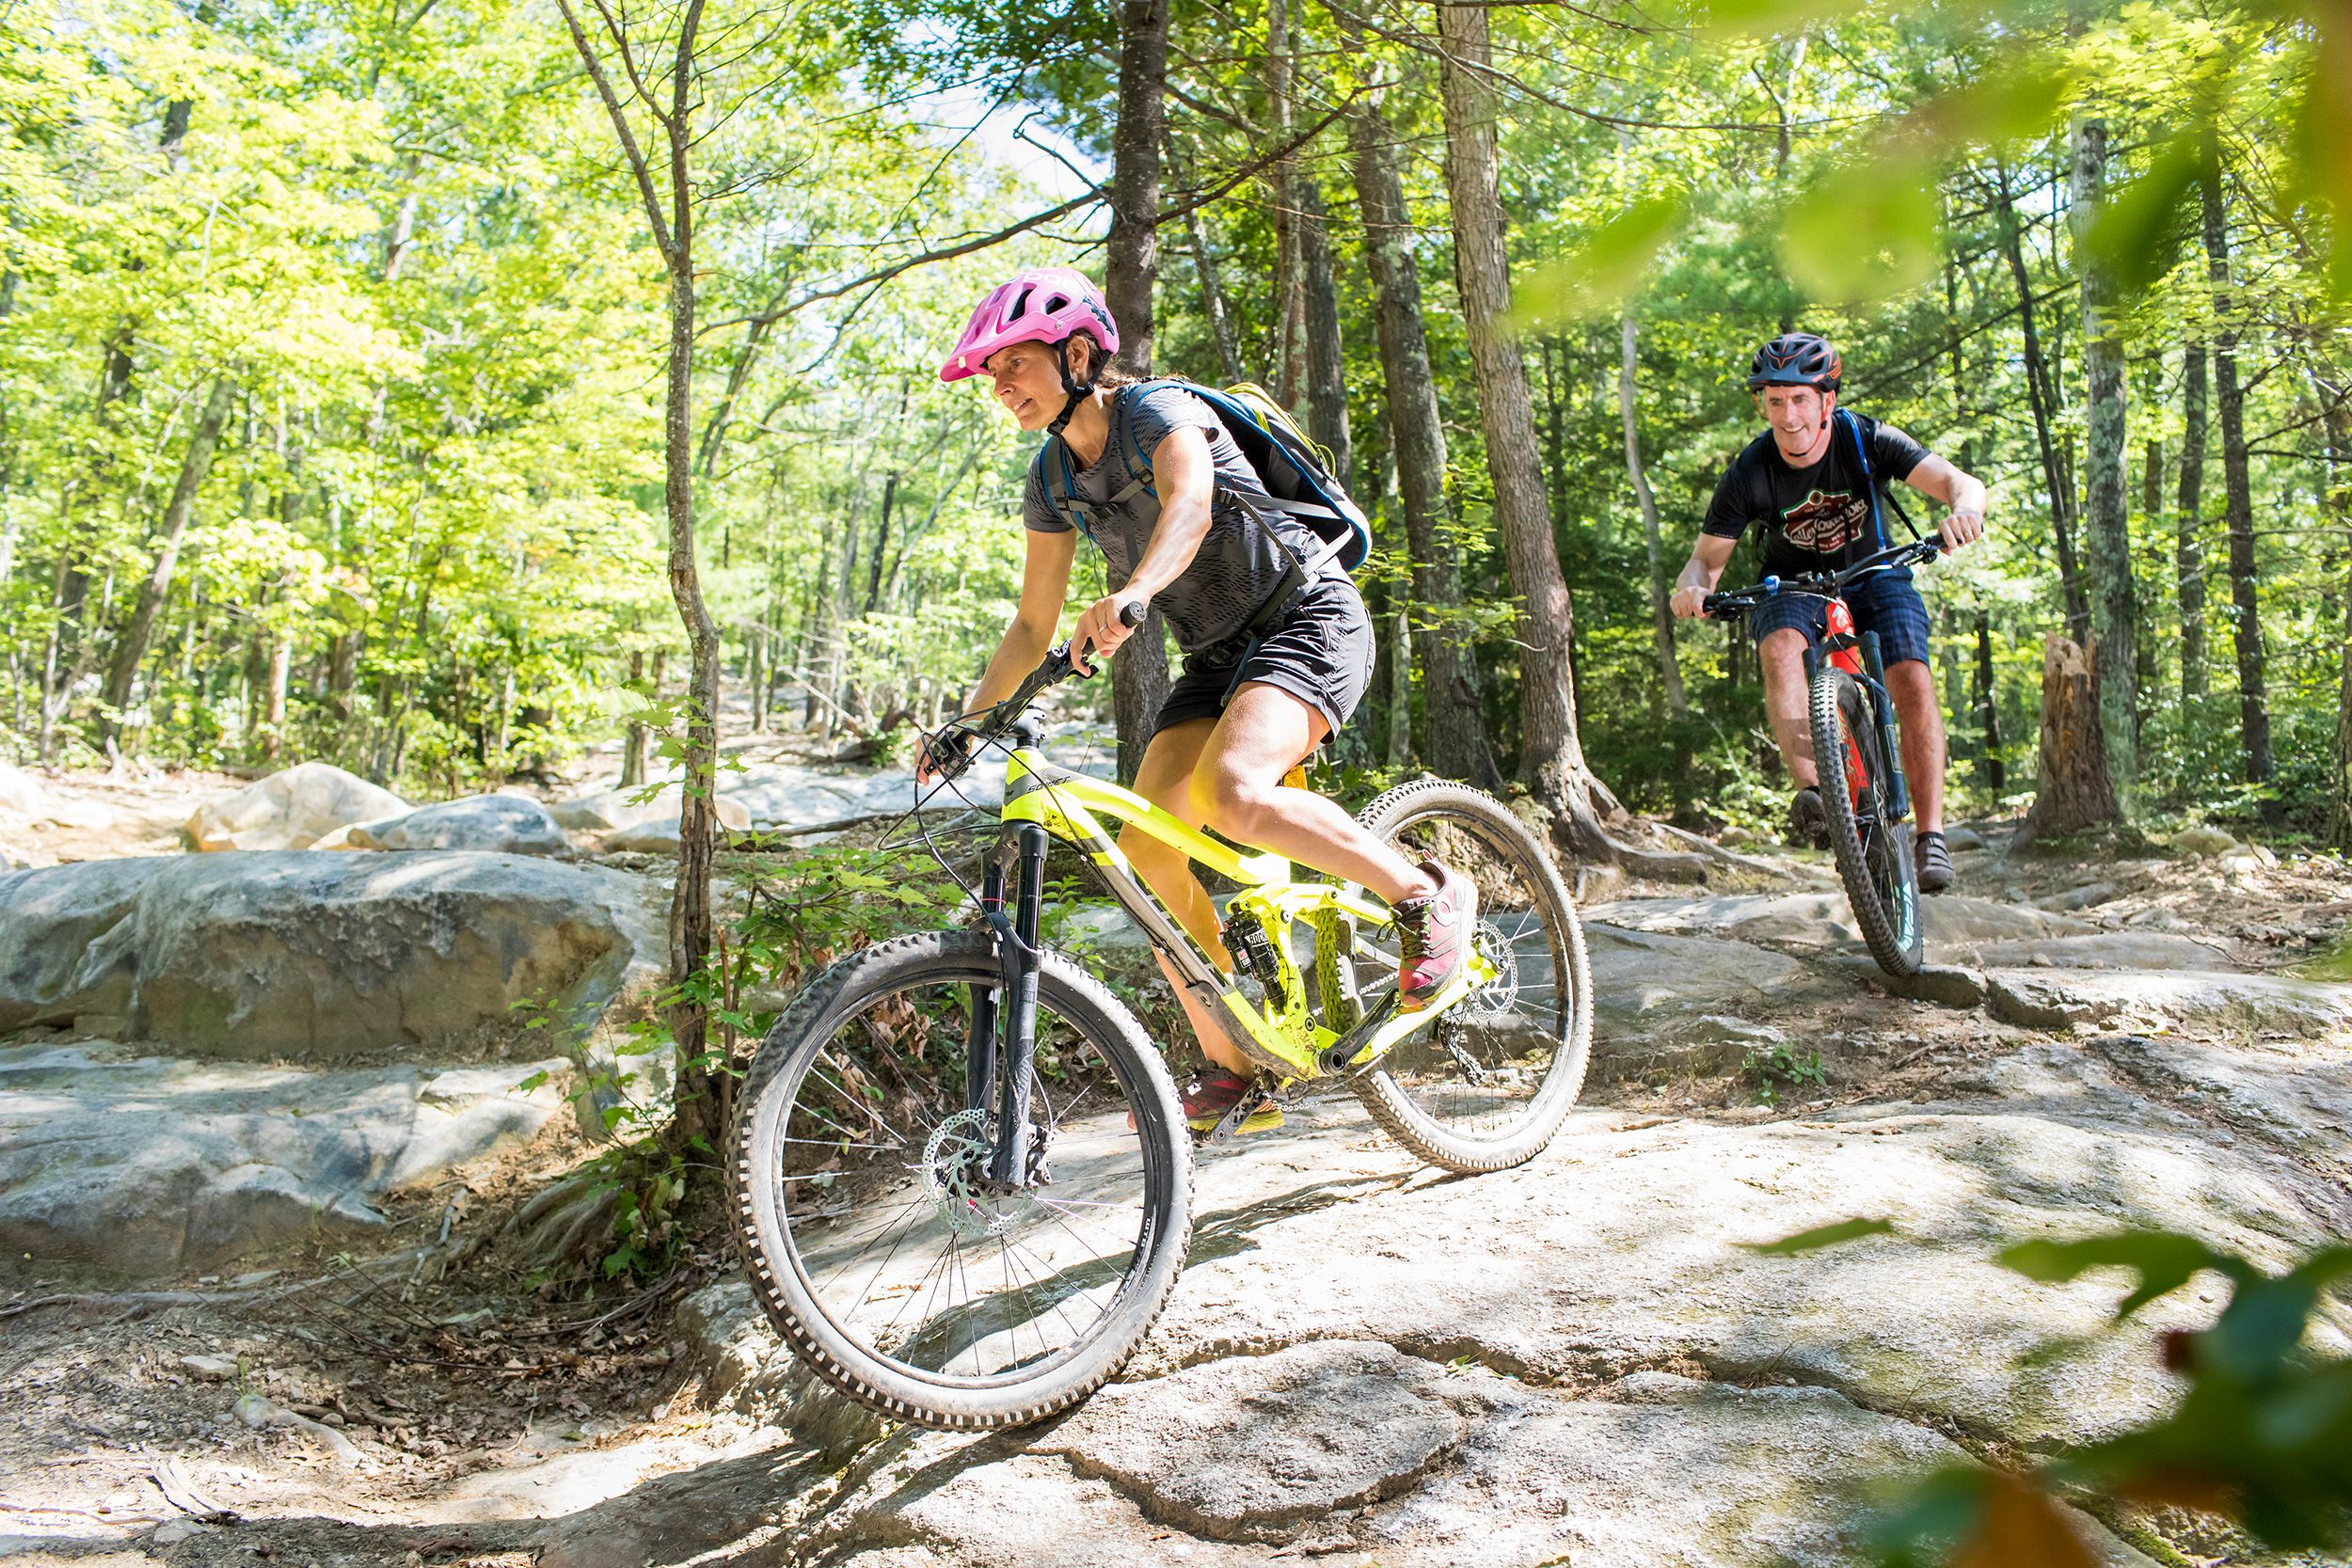 Mountain biking in Western MA is an experience you won't want to miss.